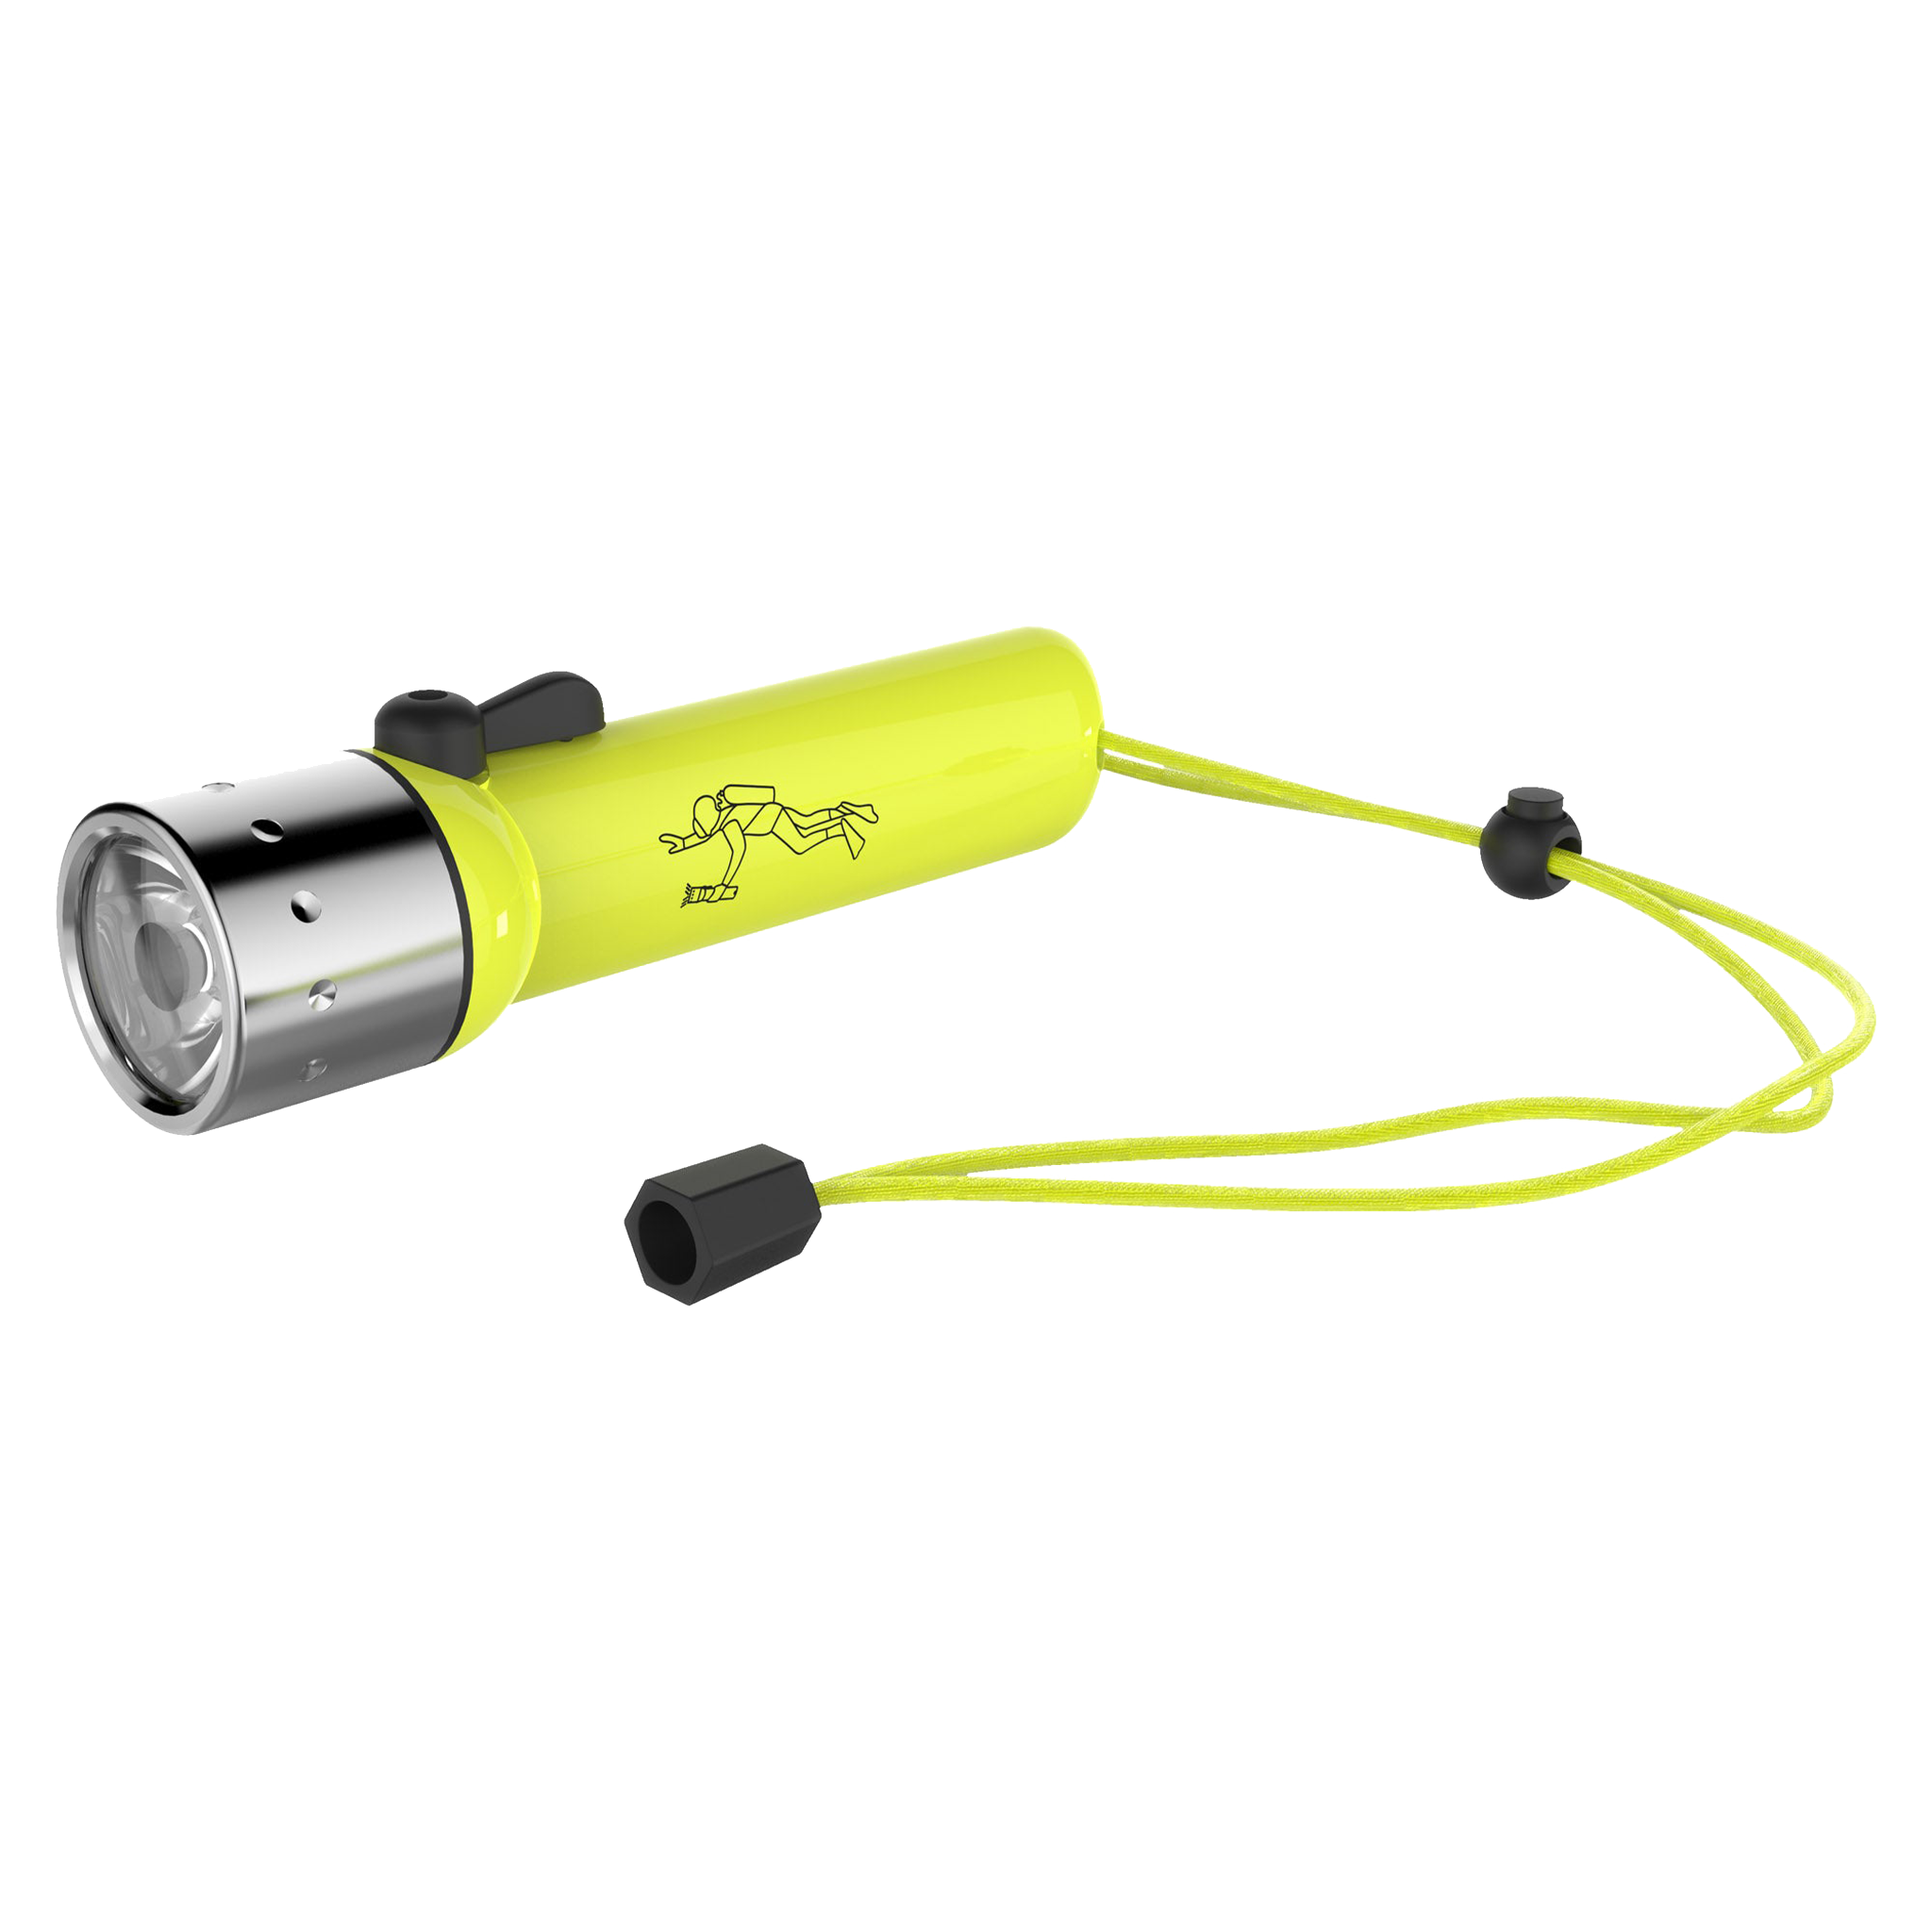 D14.2 Battery Operated Torch